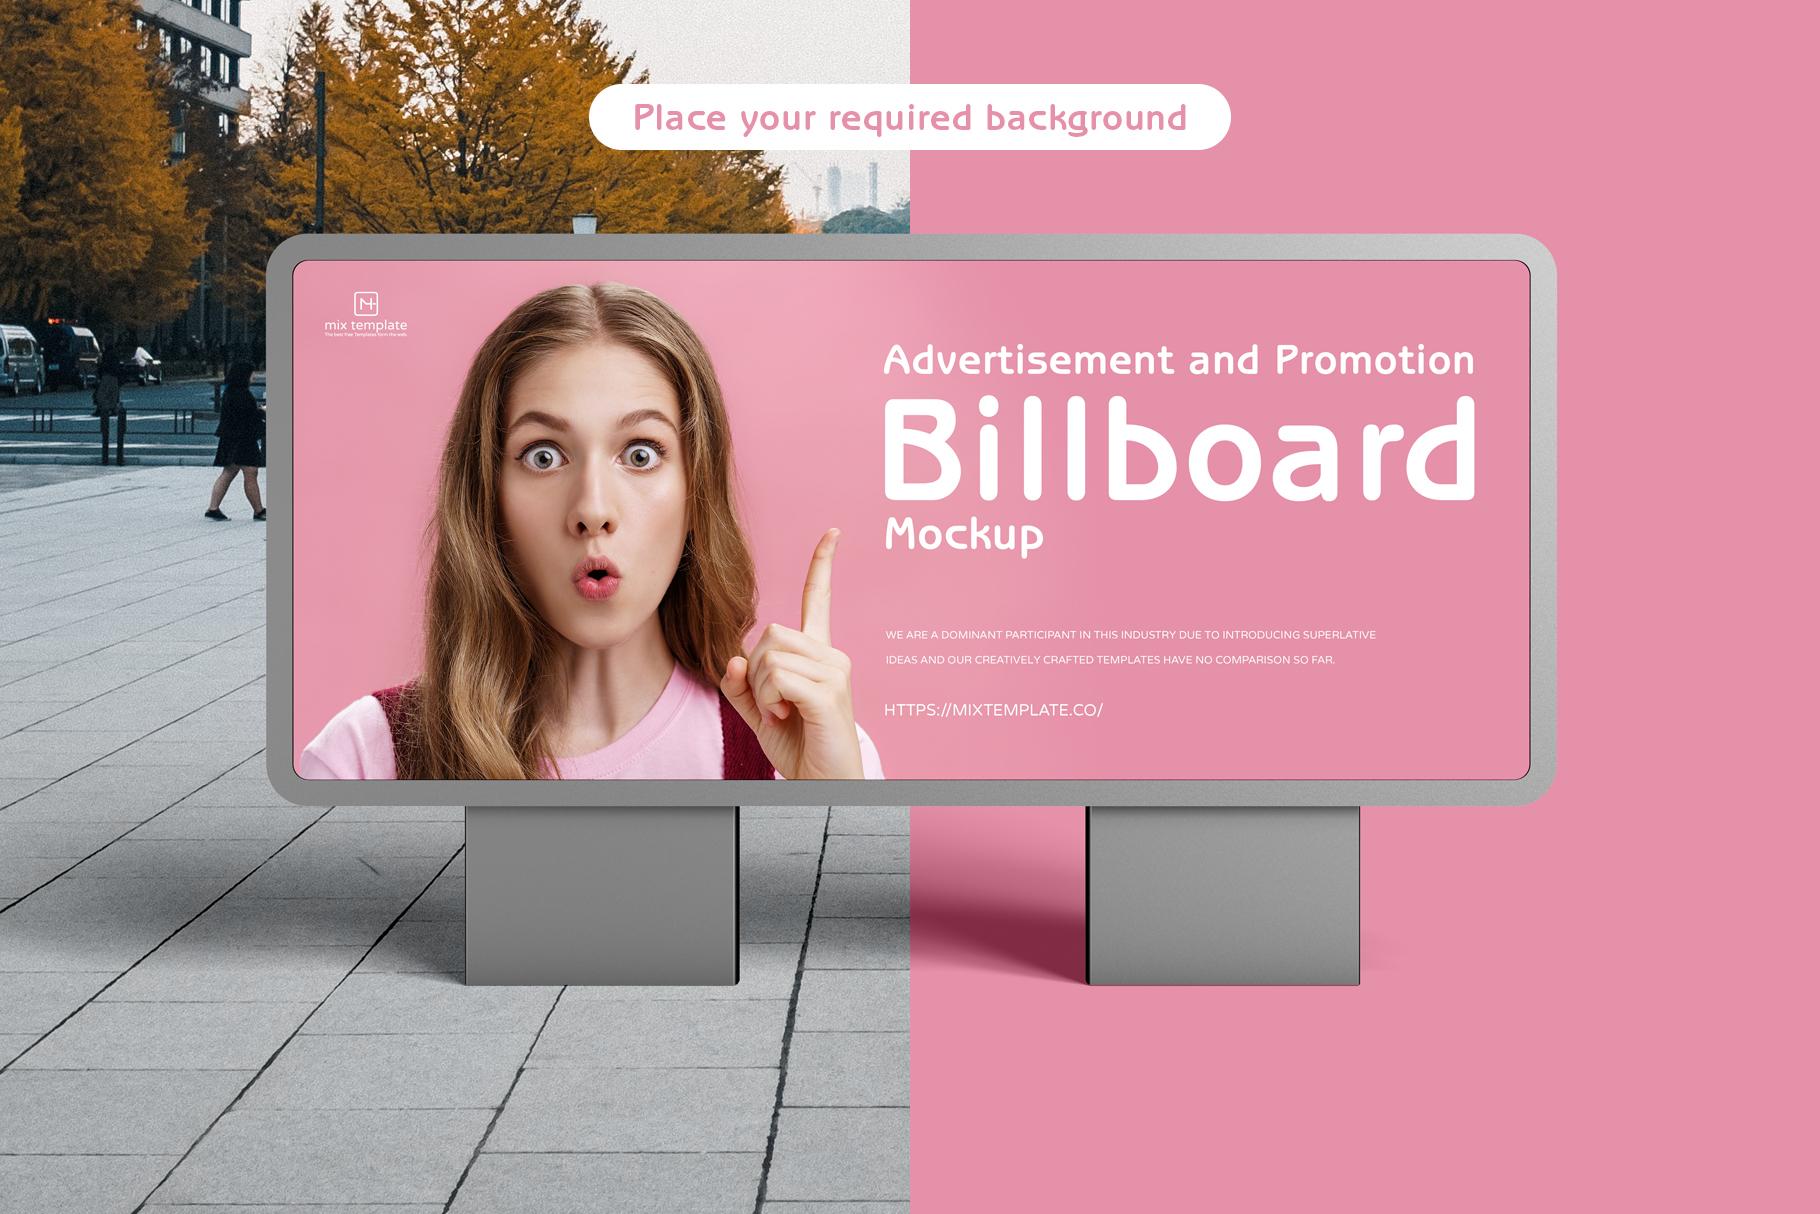 Brand-Advertisement-And-Promotion-Billboard-Mockup-Template-1